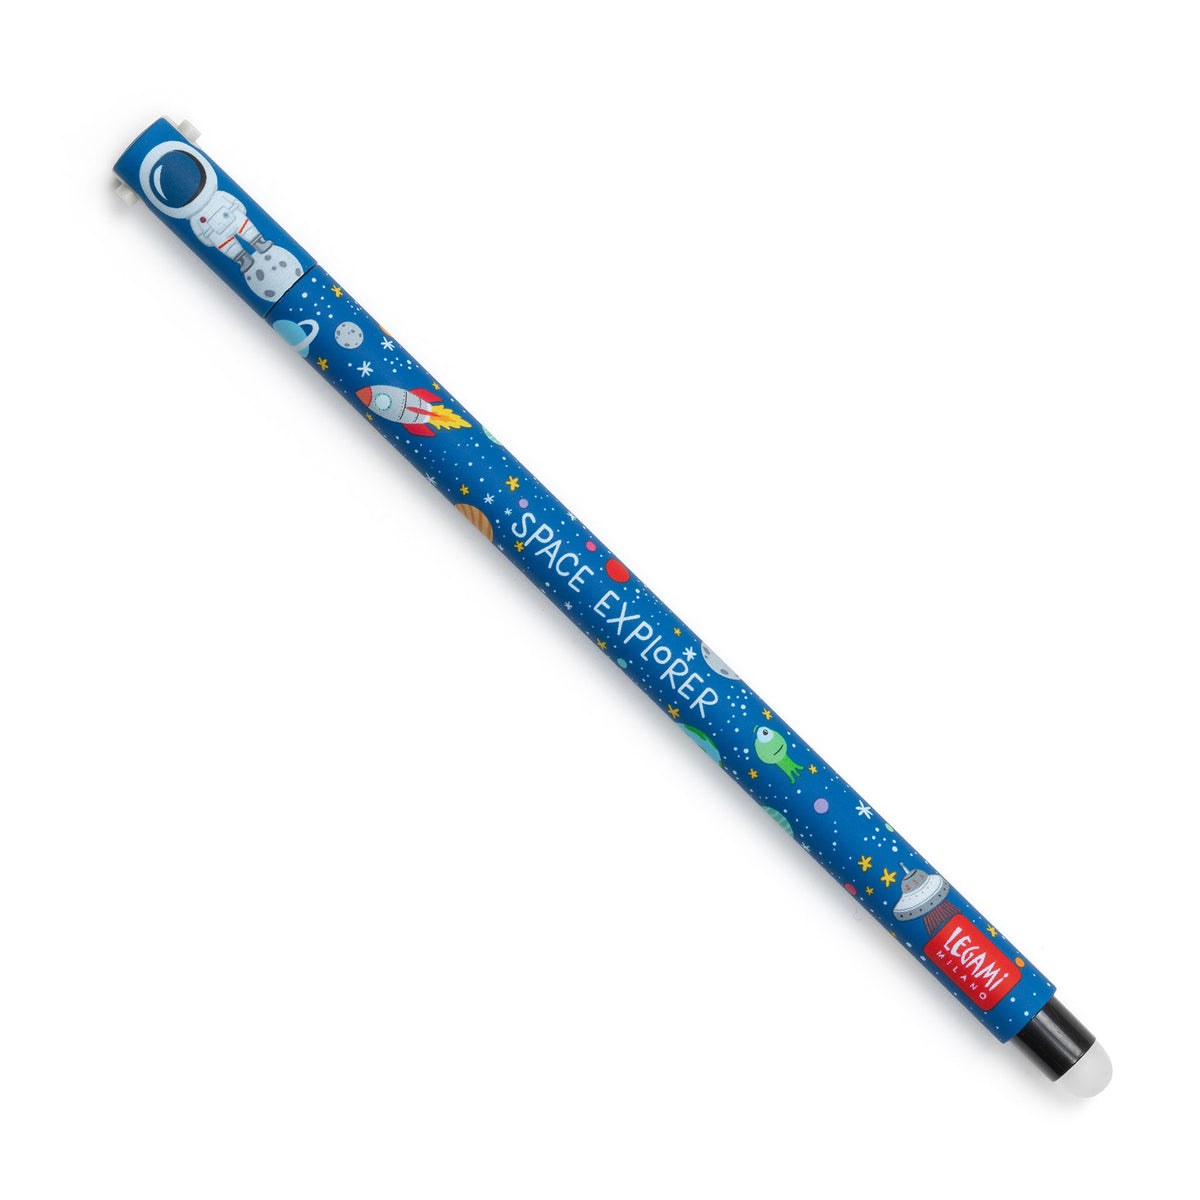 An image of a navy coloured space patterned erasable pen by Legami. It has an erasable ball at the other end of the pen.